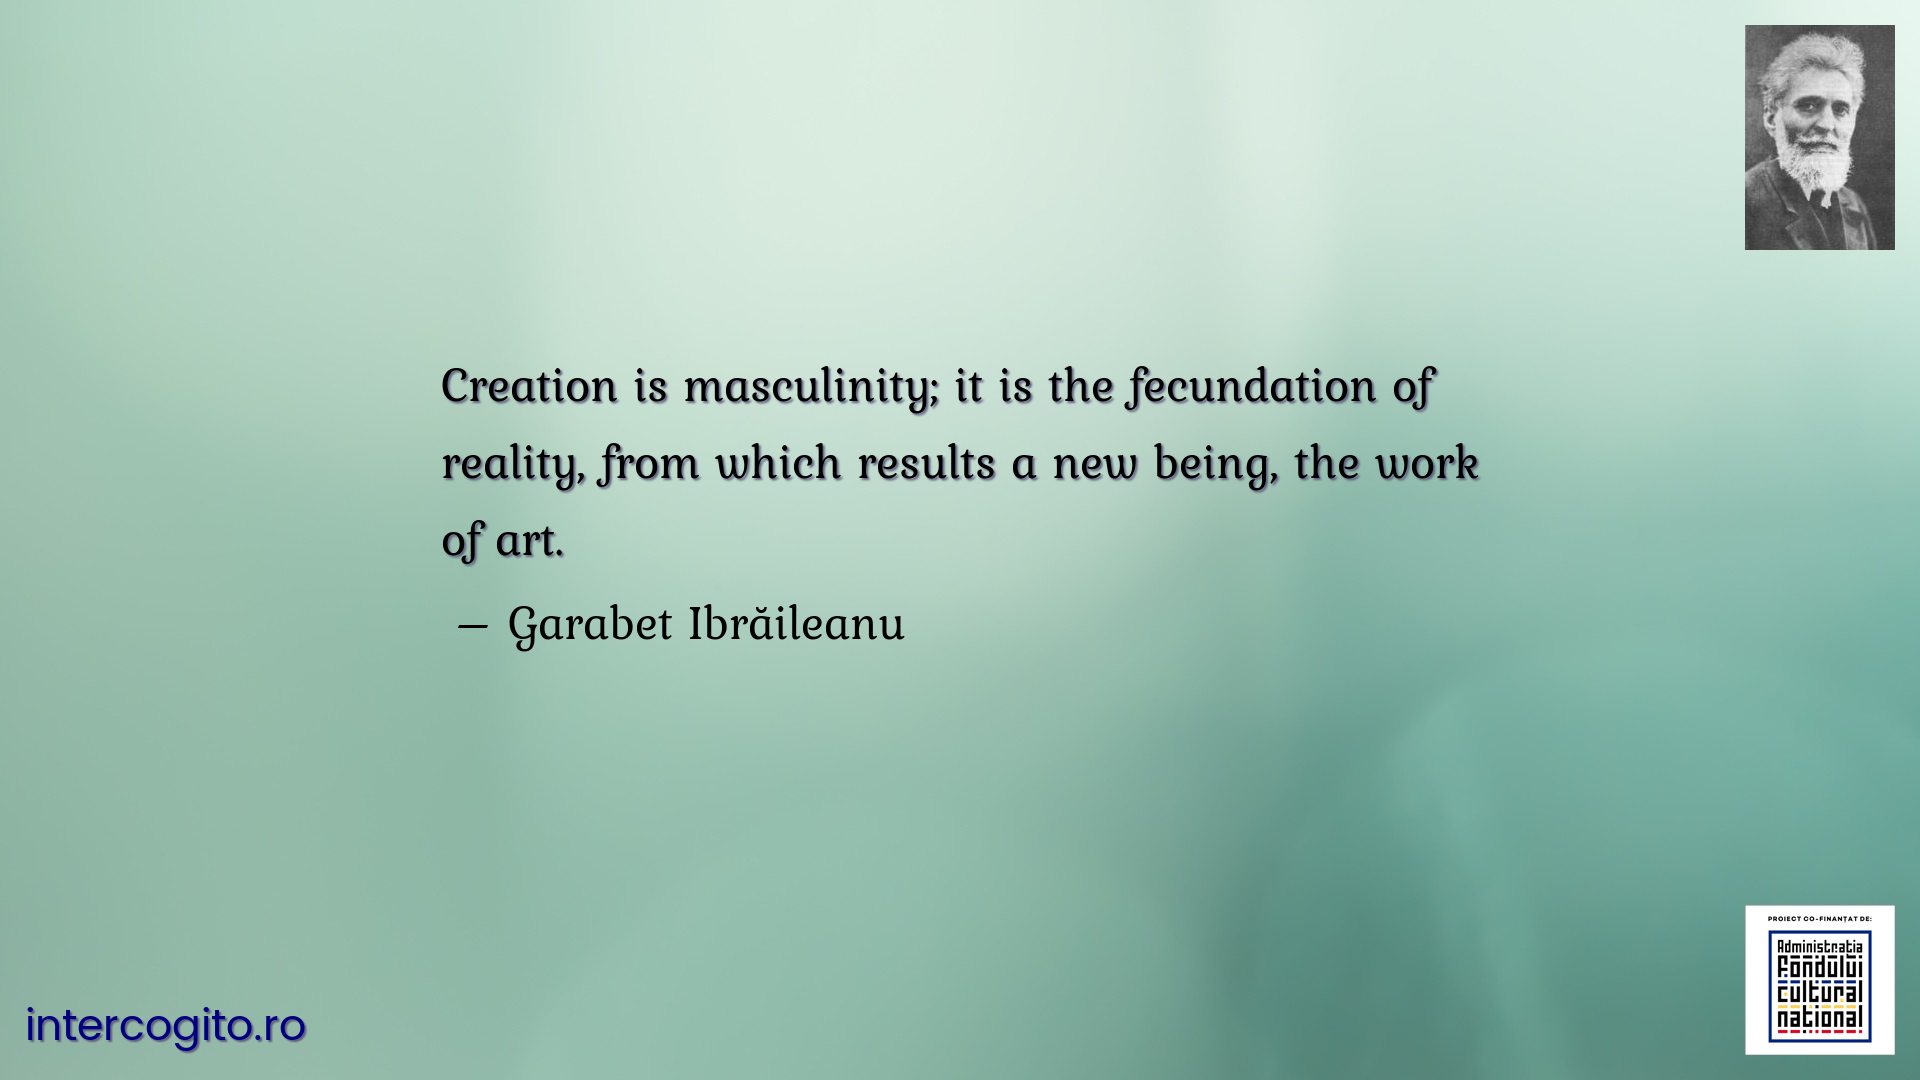 Creation is masculinity; it is the fecundation of reality, from which results a new being, the work of art.